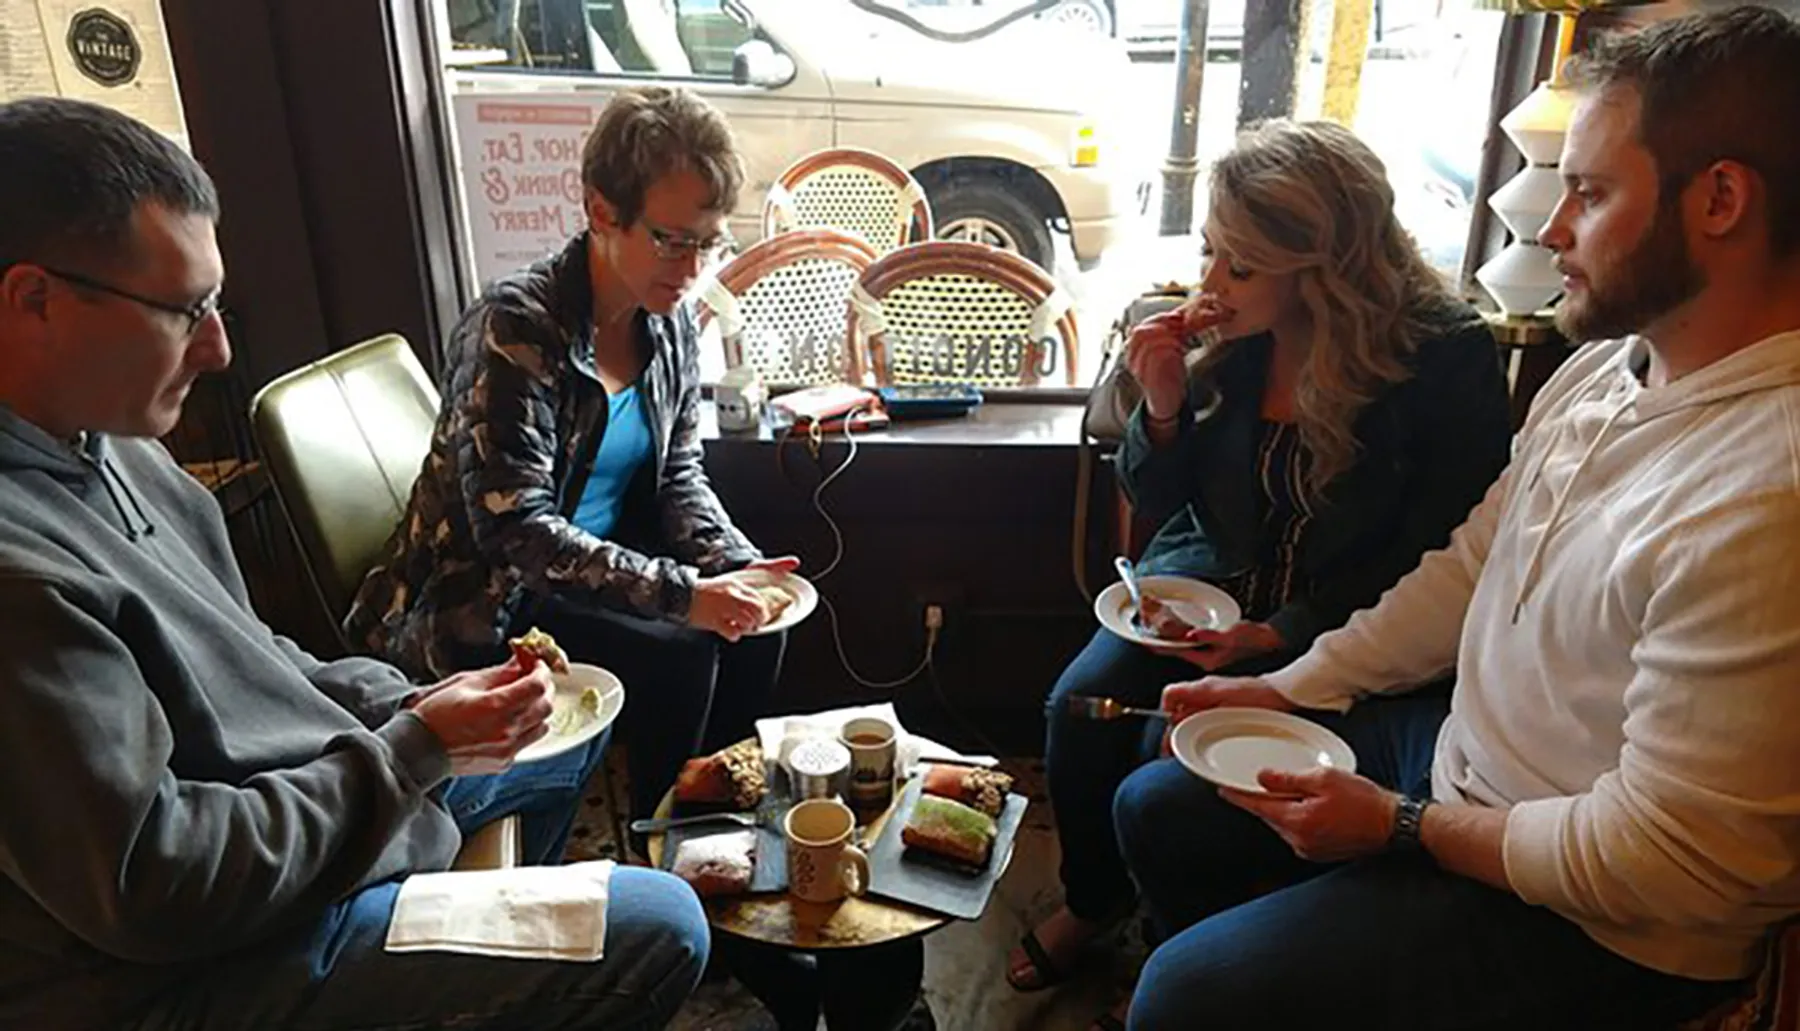 Four people are sitting in a cozy coffee shop setting, enjoying beverages and pastries while engaged in conversation.